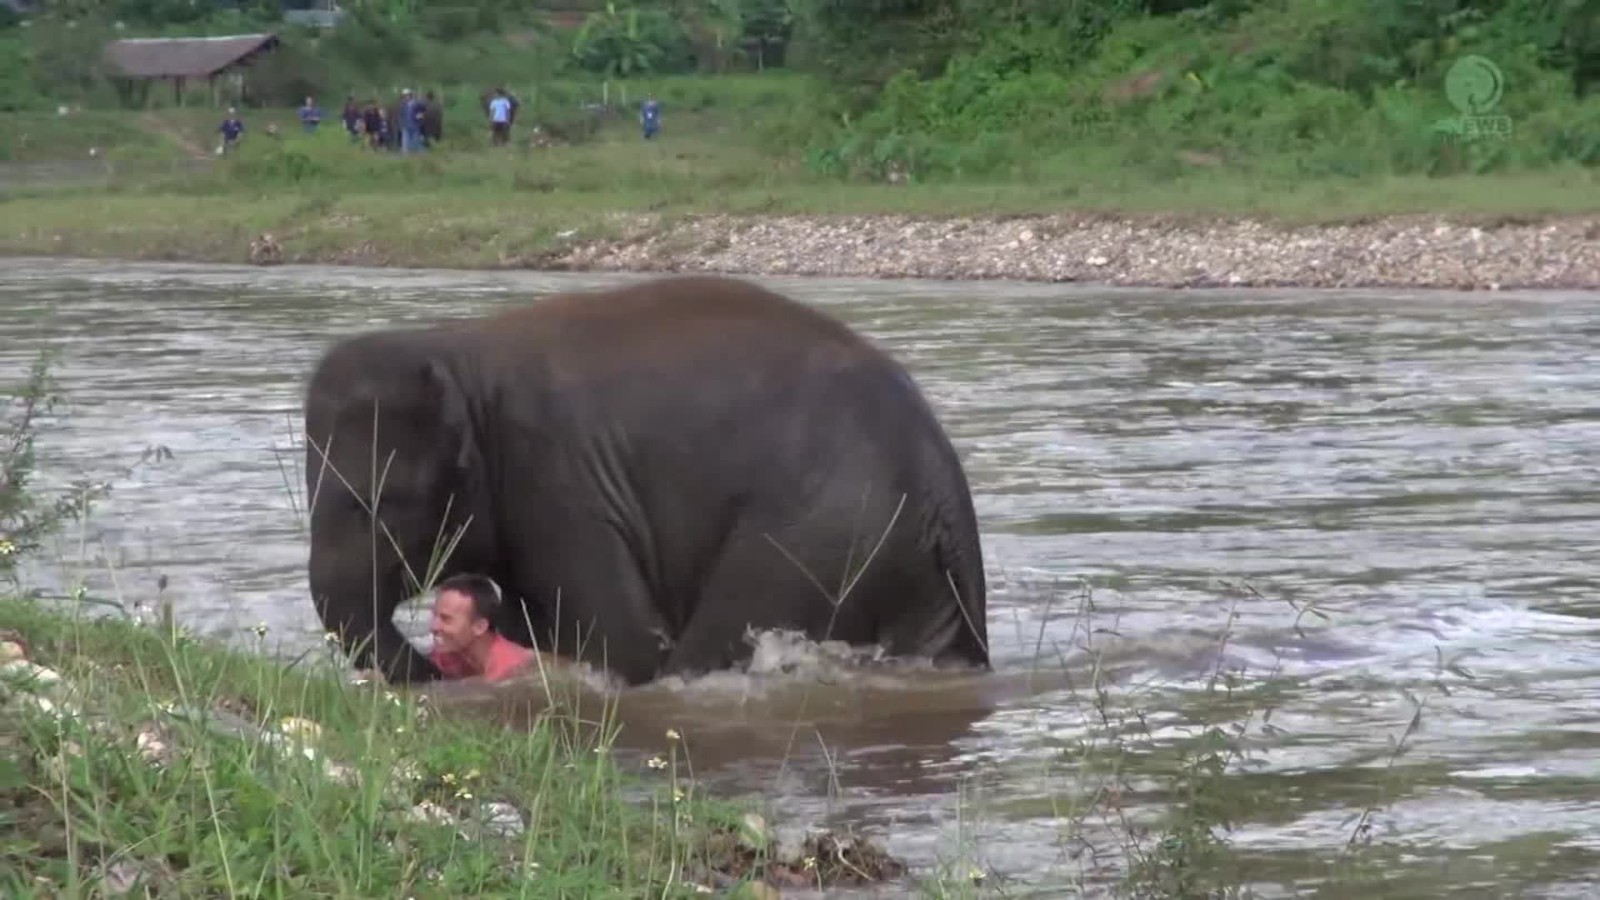 Baby elephant 'rescues' man who saved her - CNN Video